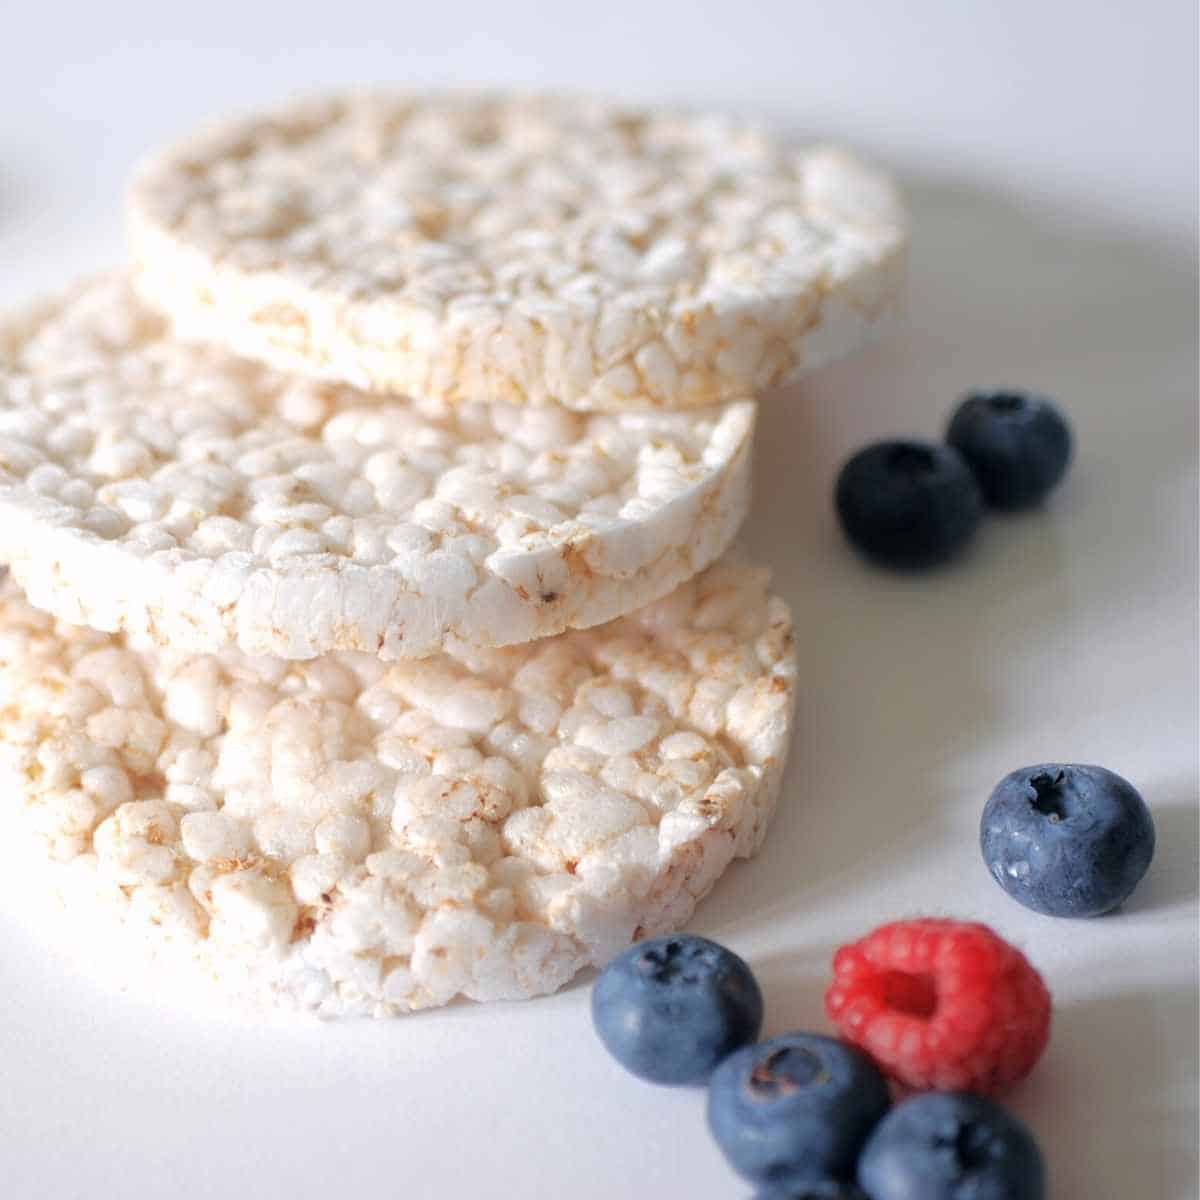 rice cakes with berries - Are Rice Cakes Keto Friendly?